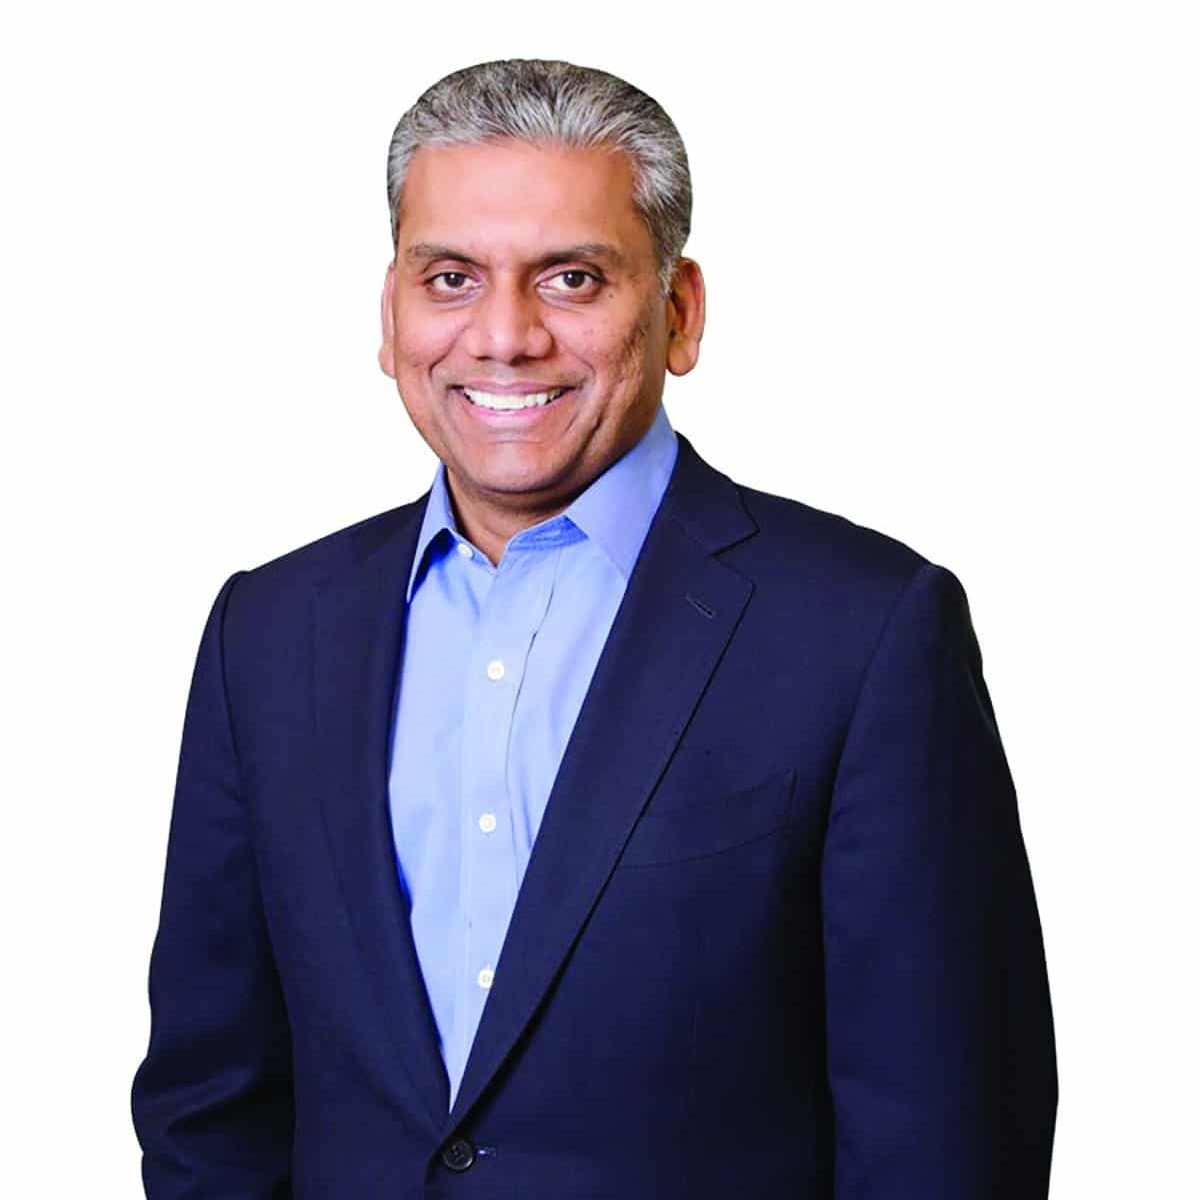 Anurag Jain smiling in a dark suit and blue button down shirt in front of a white background